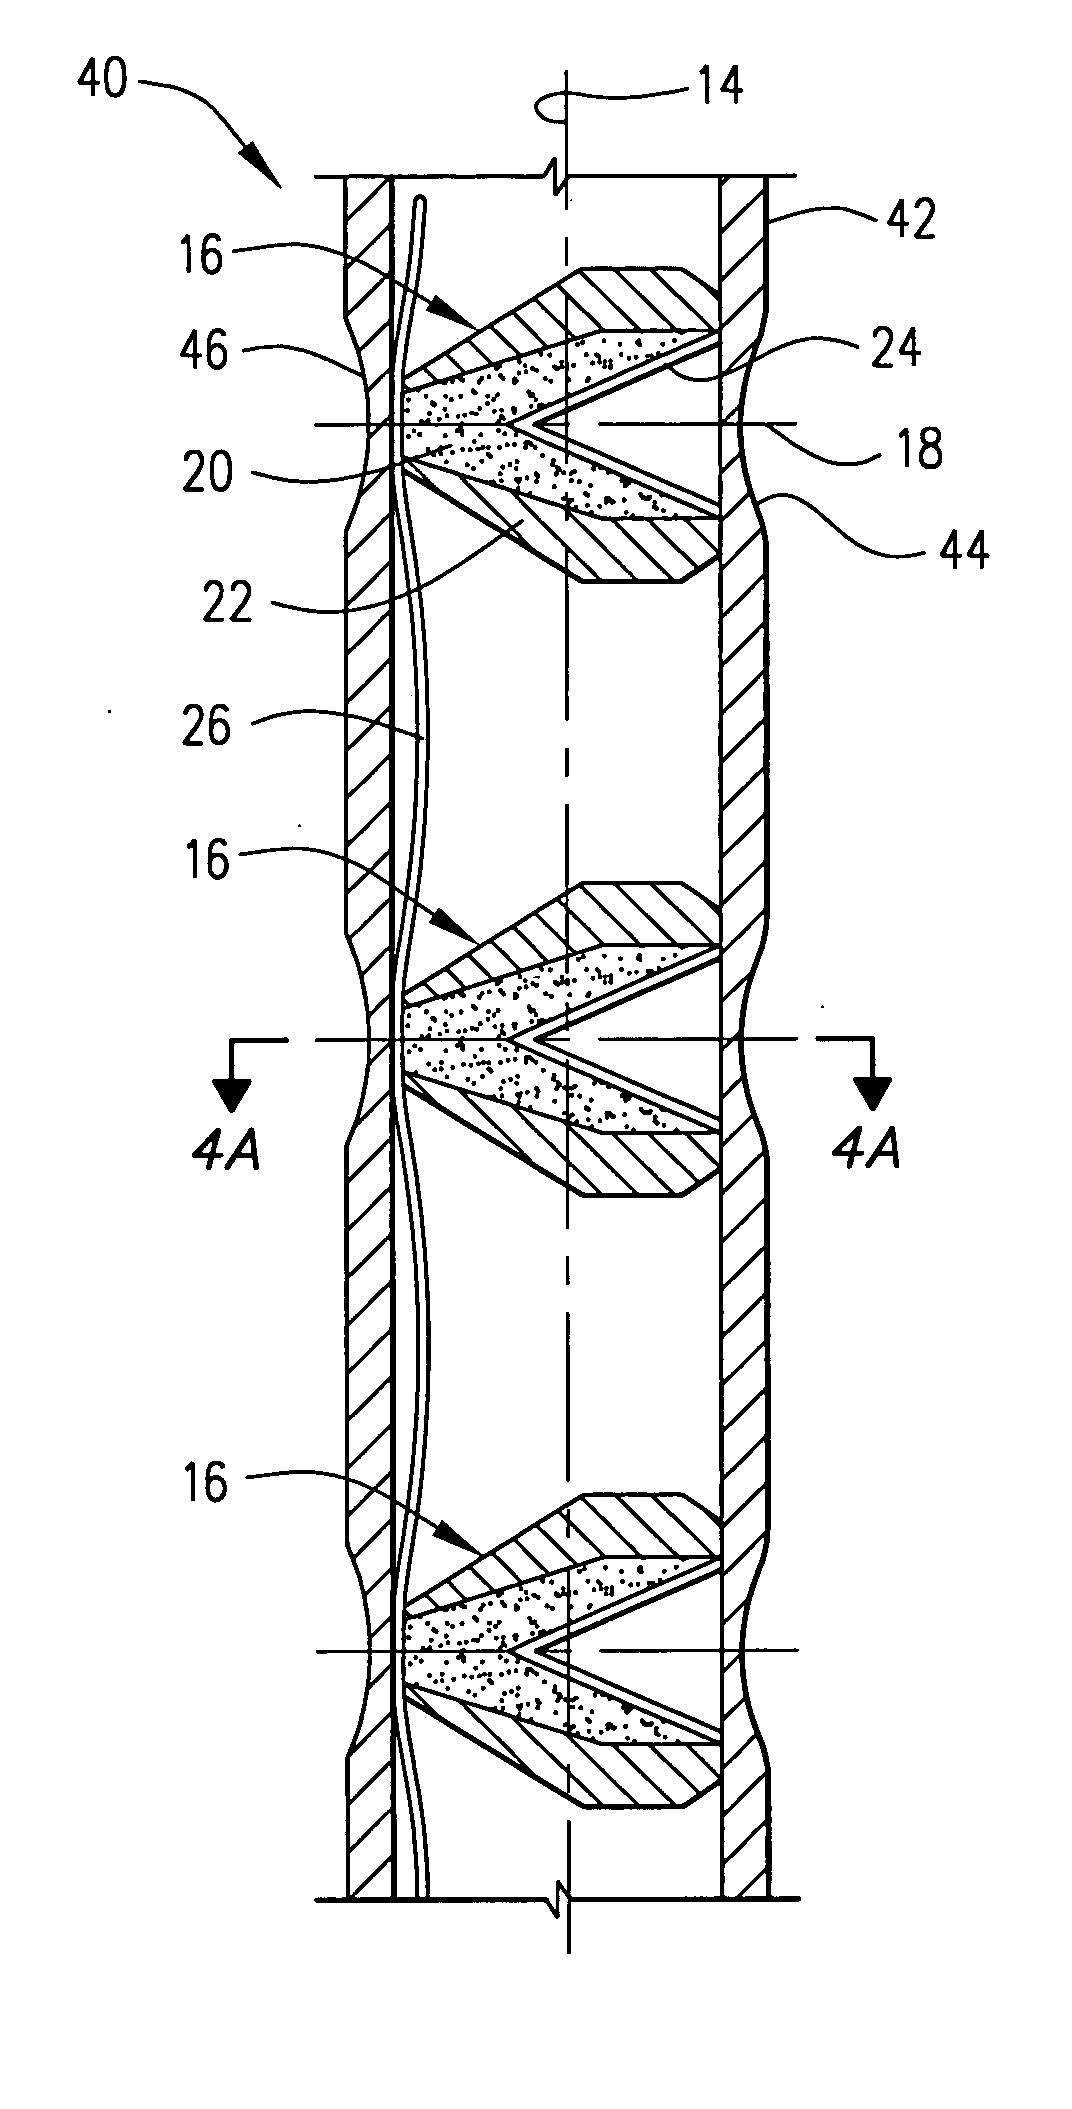 Faceted expansion relief perforating device